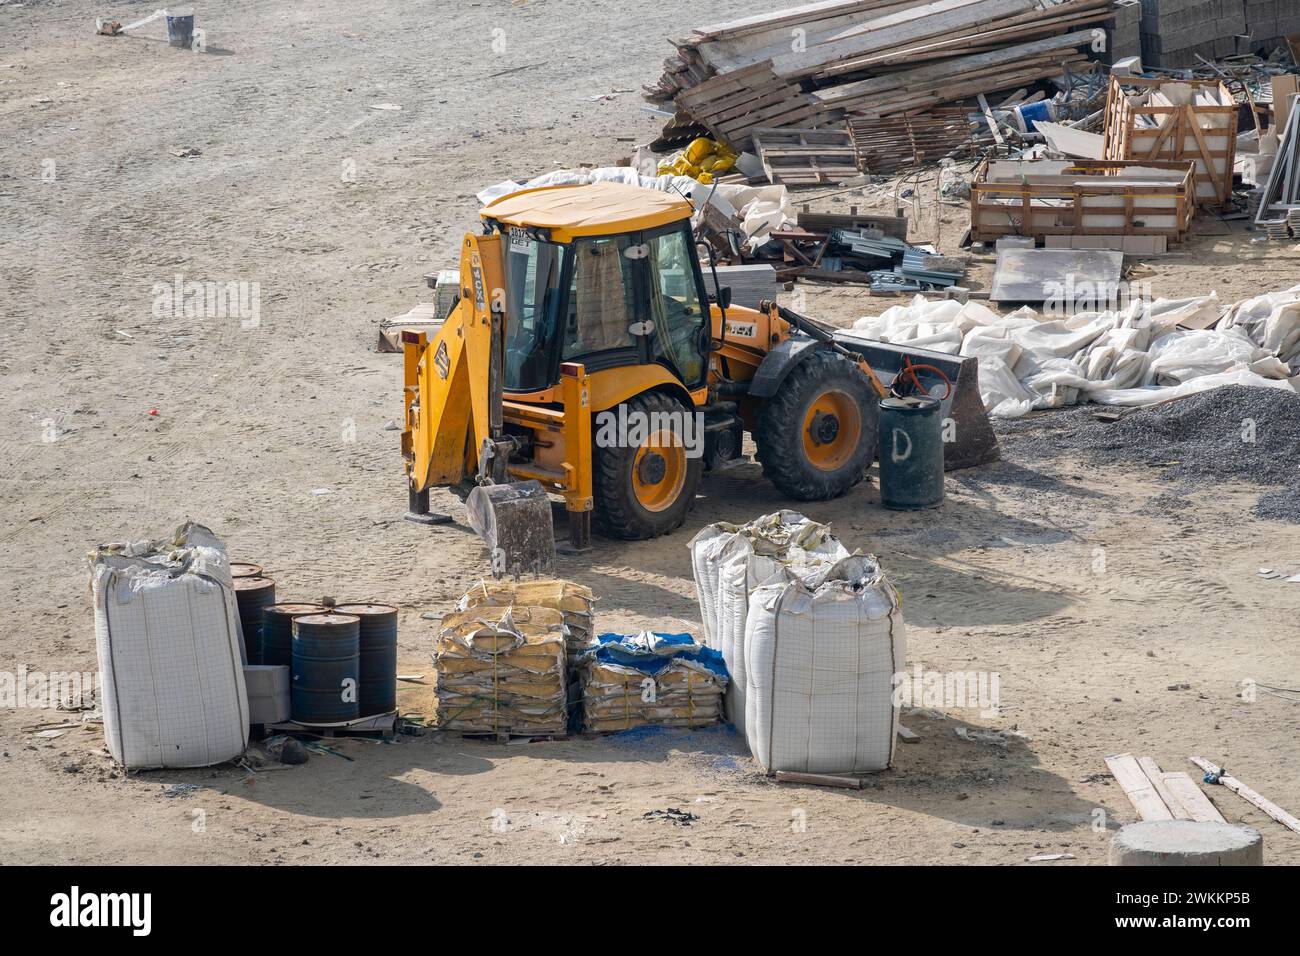 The JCB all-wheel drive backhoe loader on construction site Stock Photo